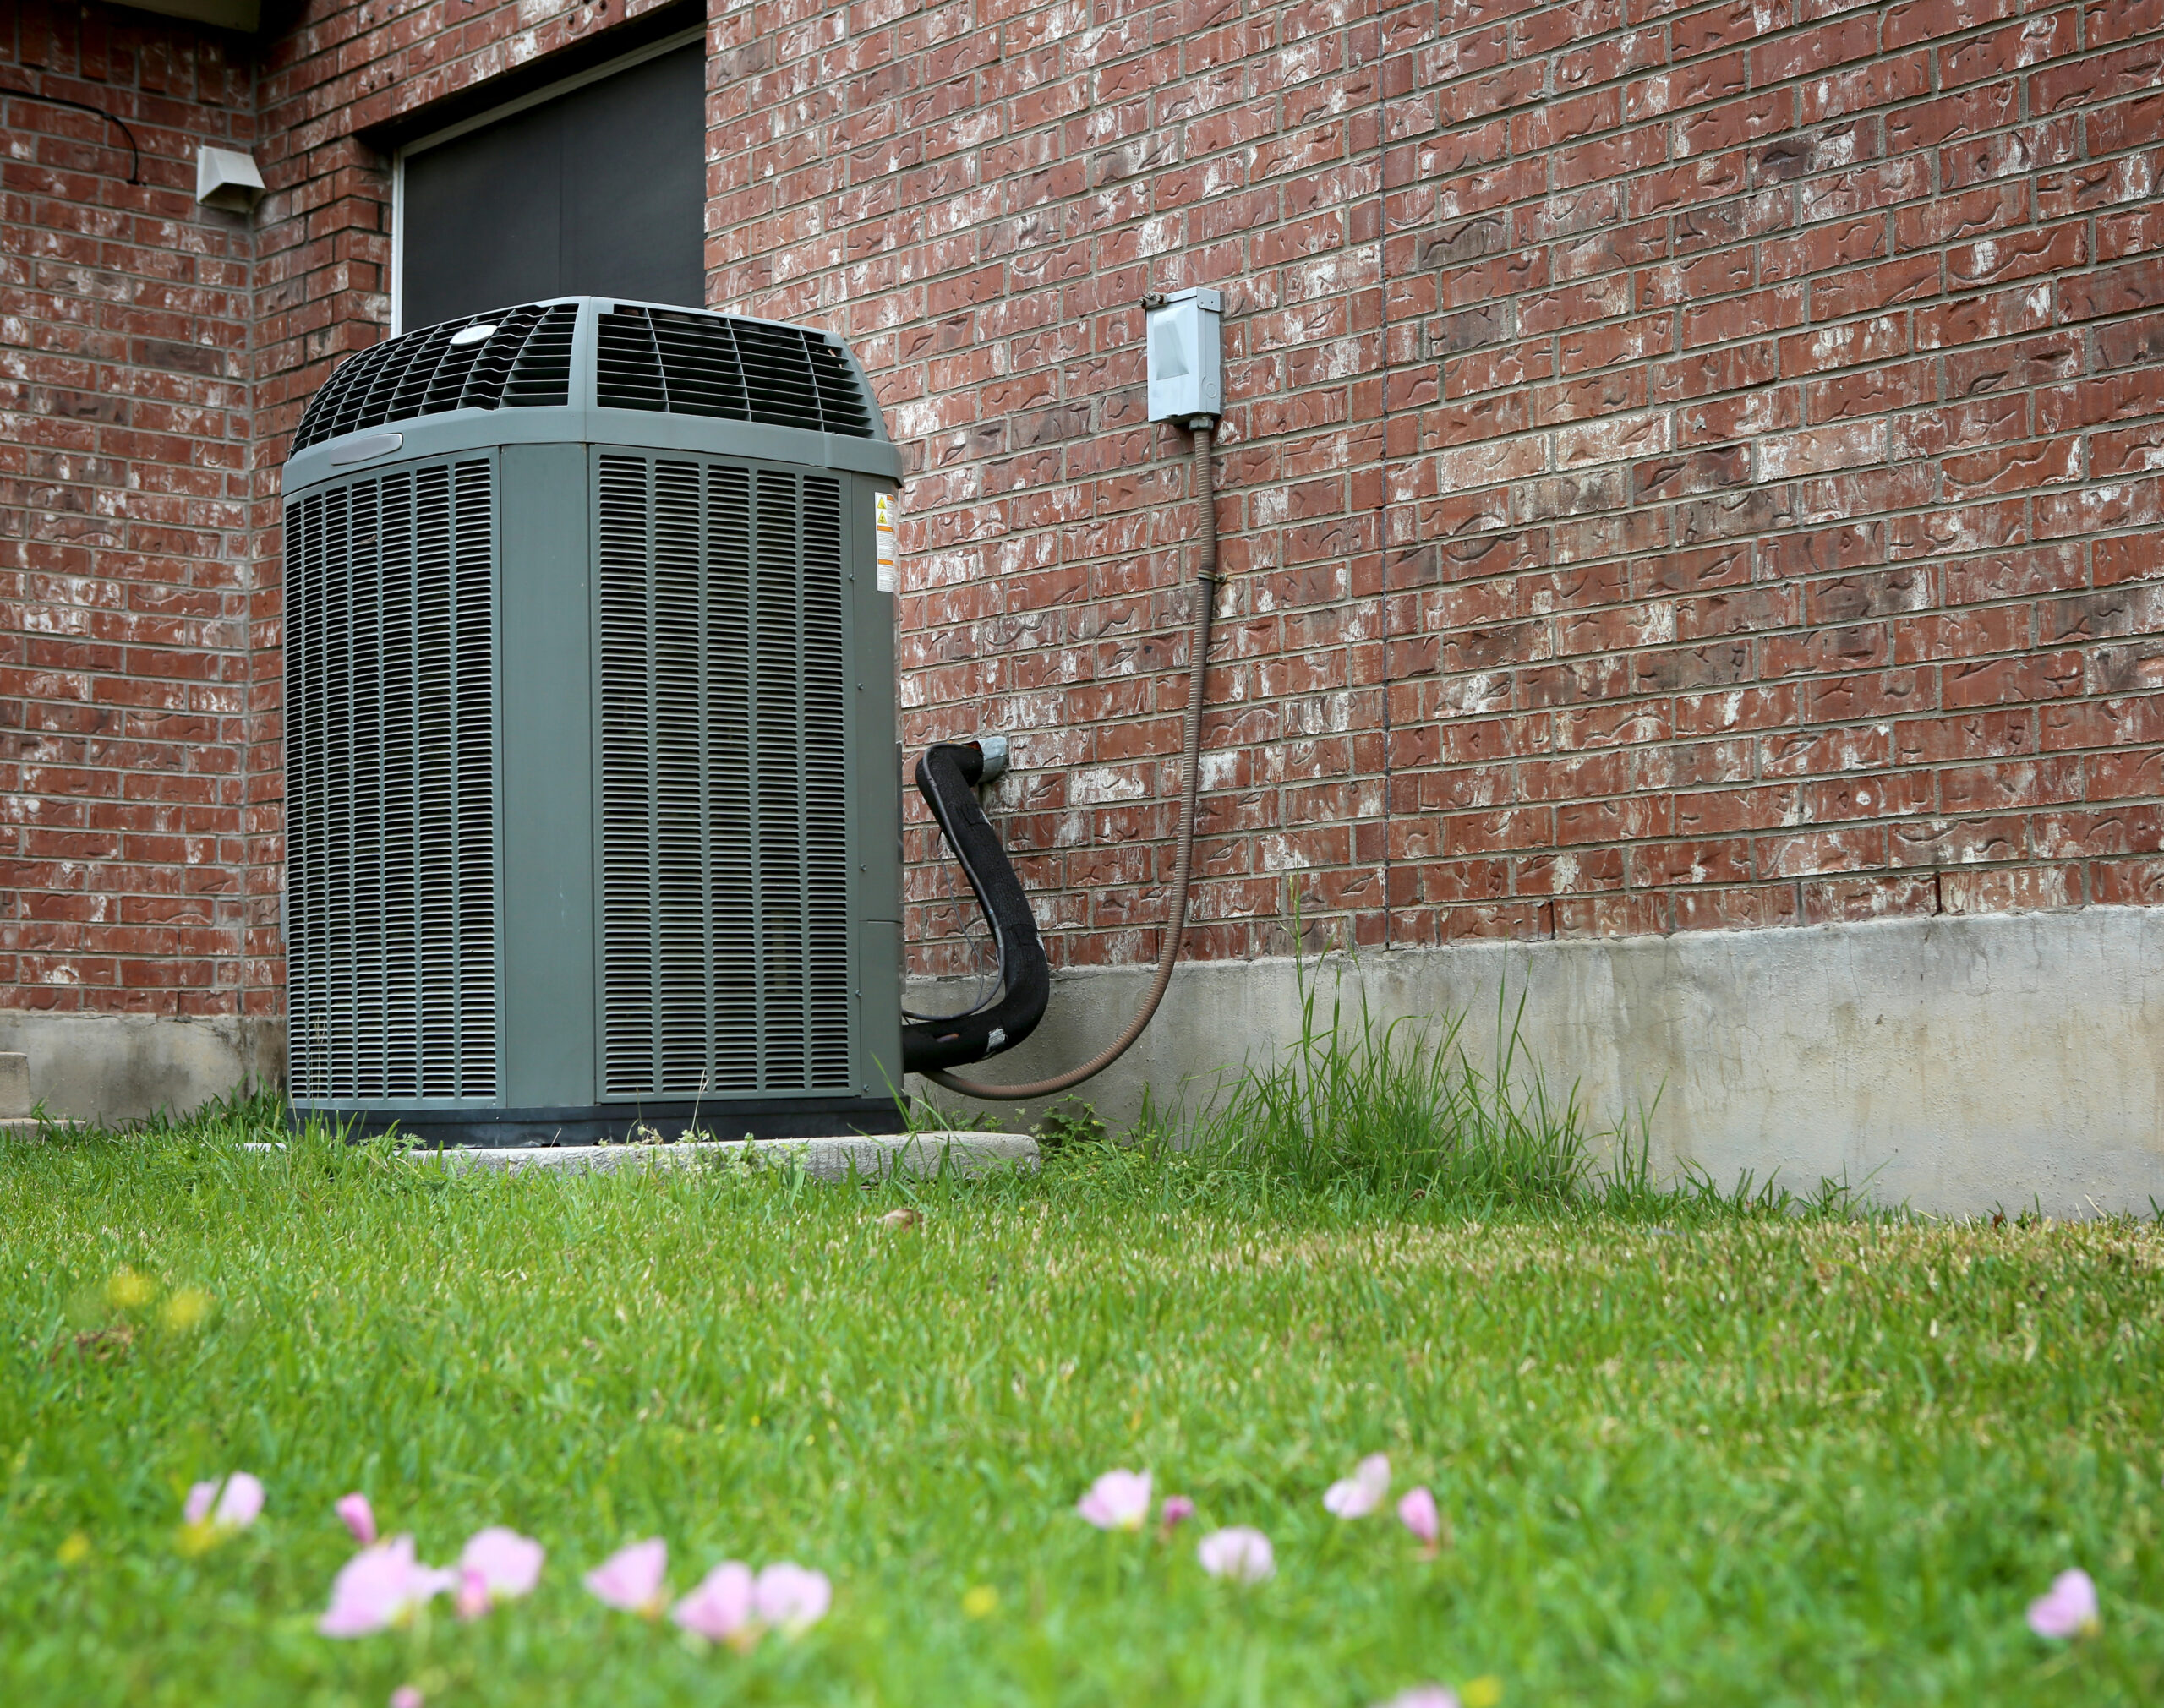 5 Reasons to Never Buy a Used Air Conditioner